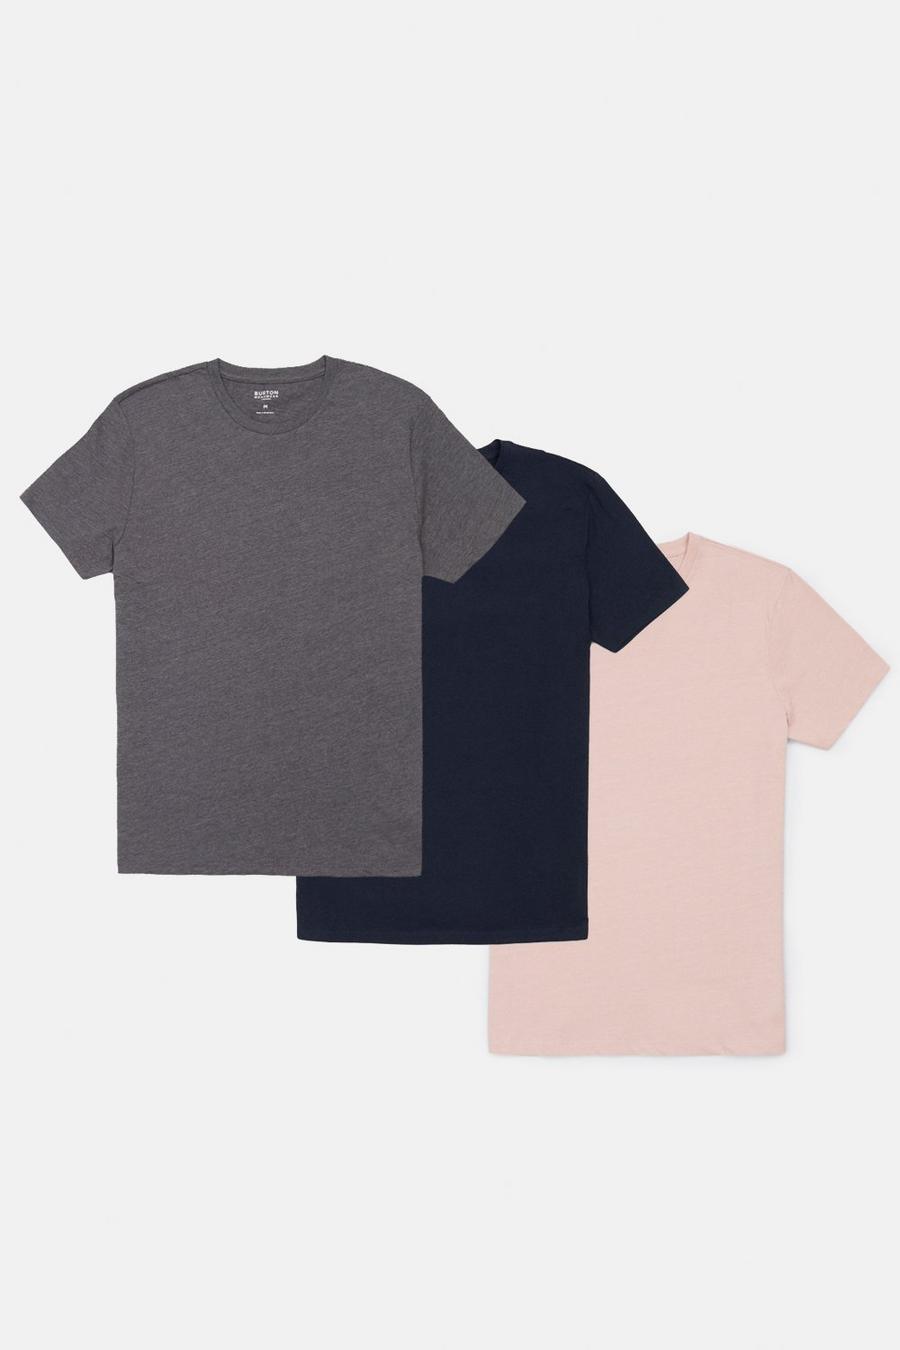 3 Pack Navy Charcoal And Coral Pink T-shirt